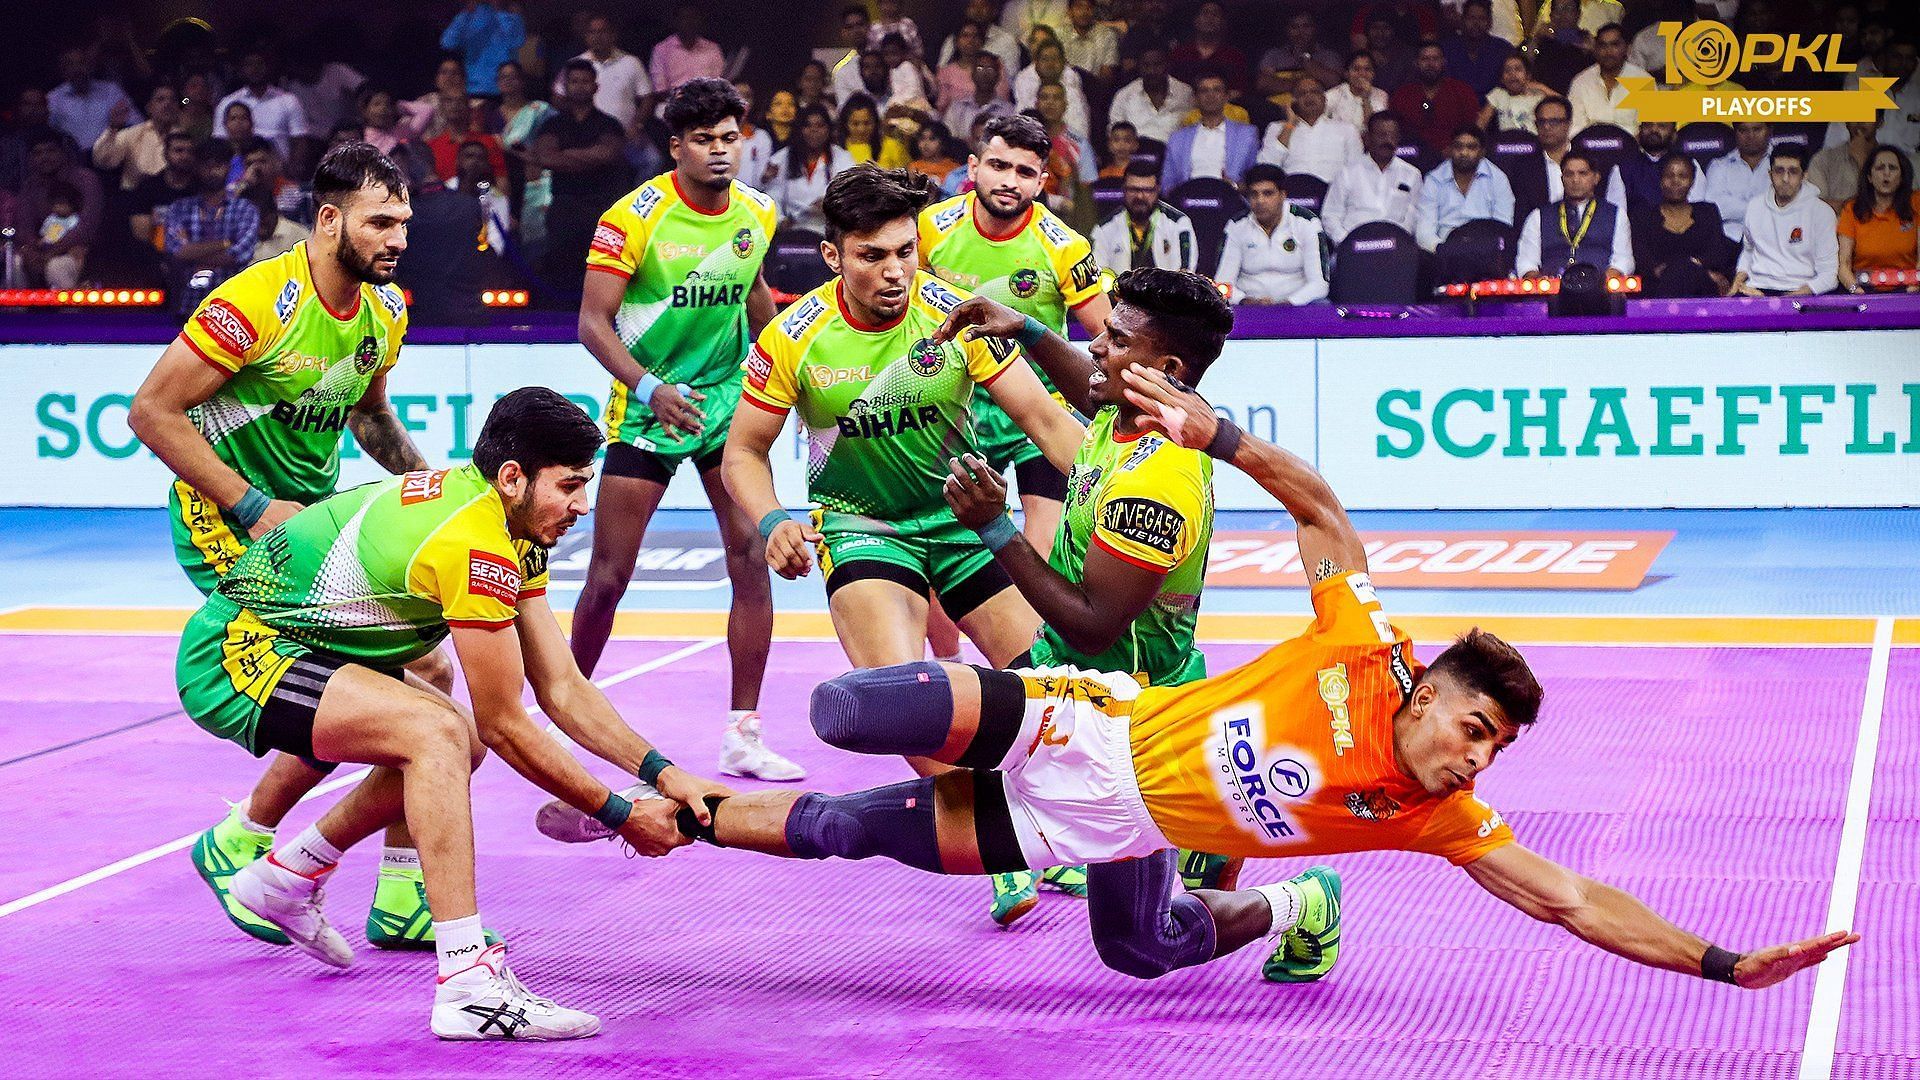 The story of Patna Pirates in the semifinal - many against one. [PKL]